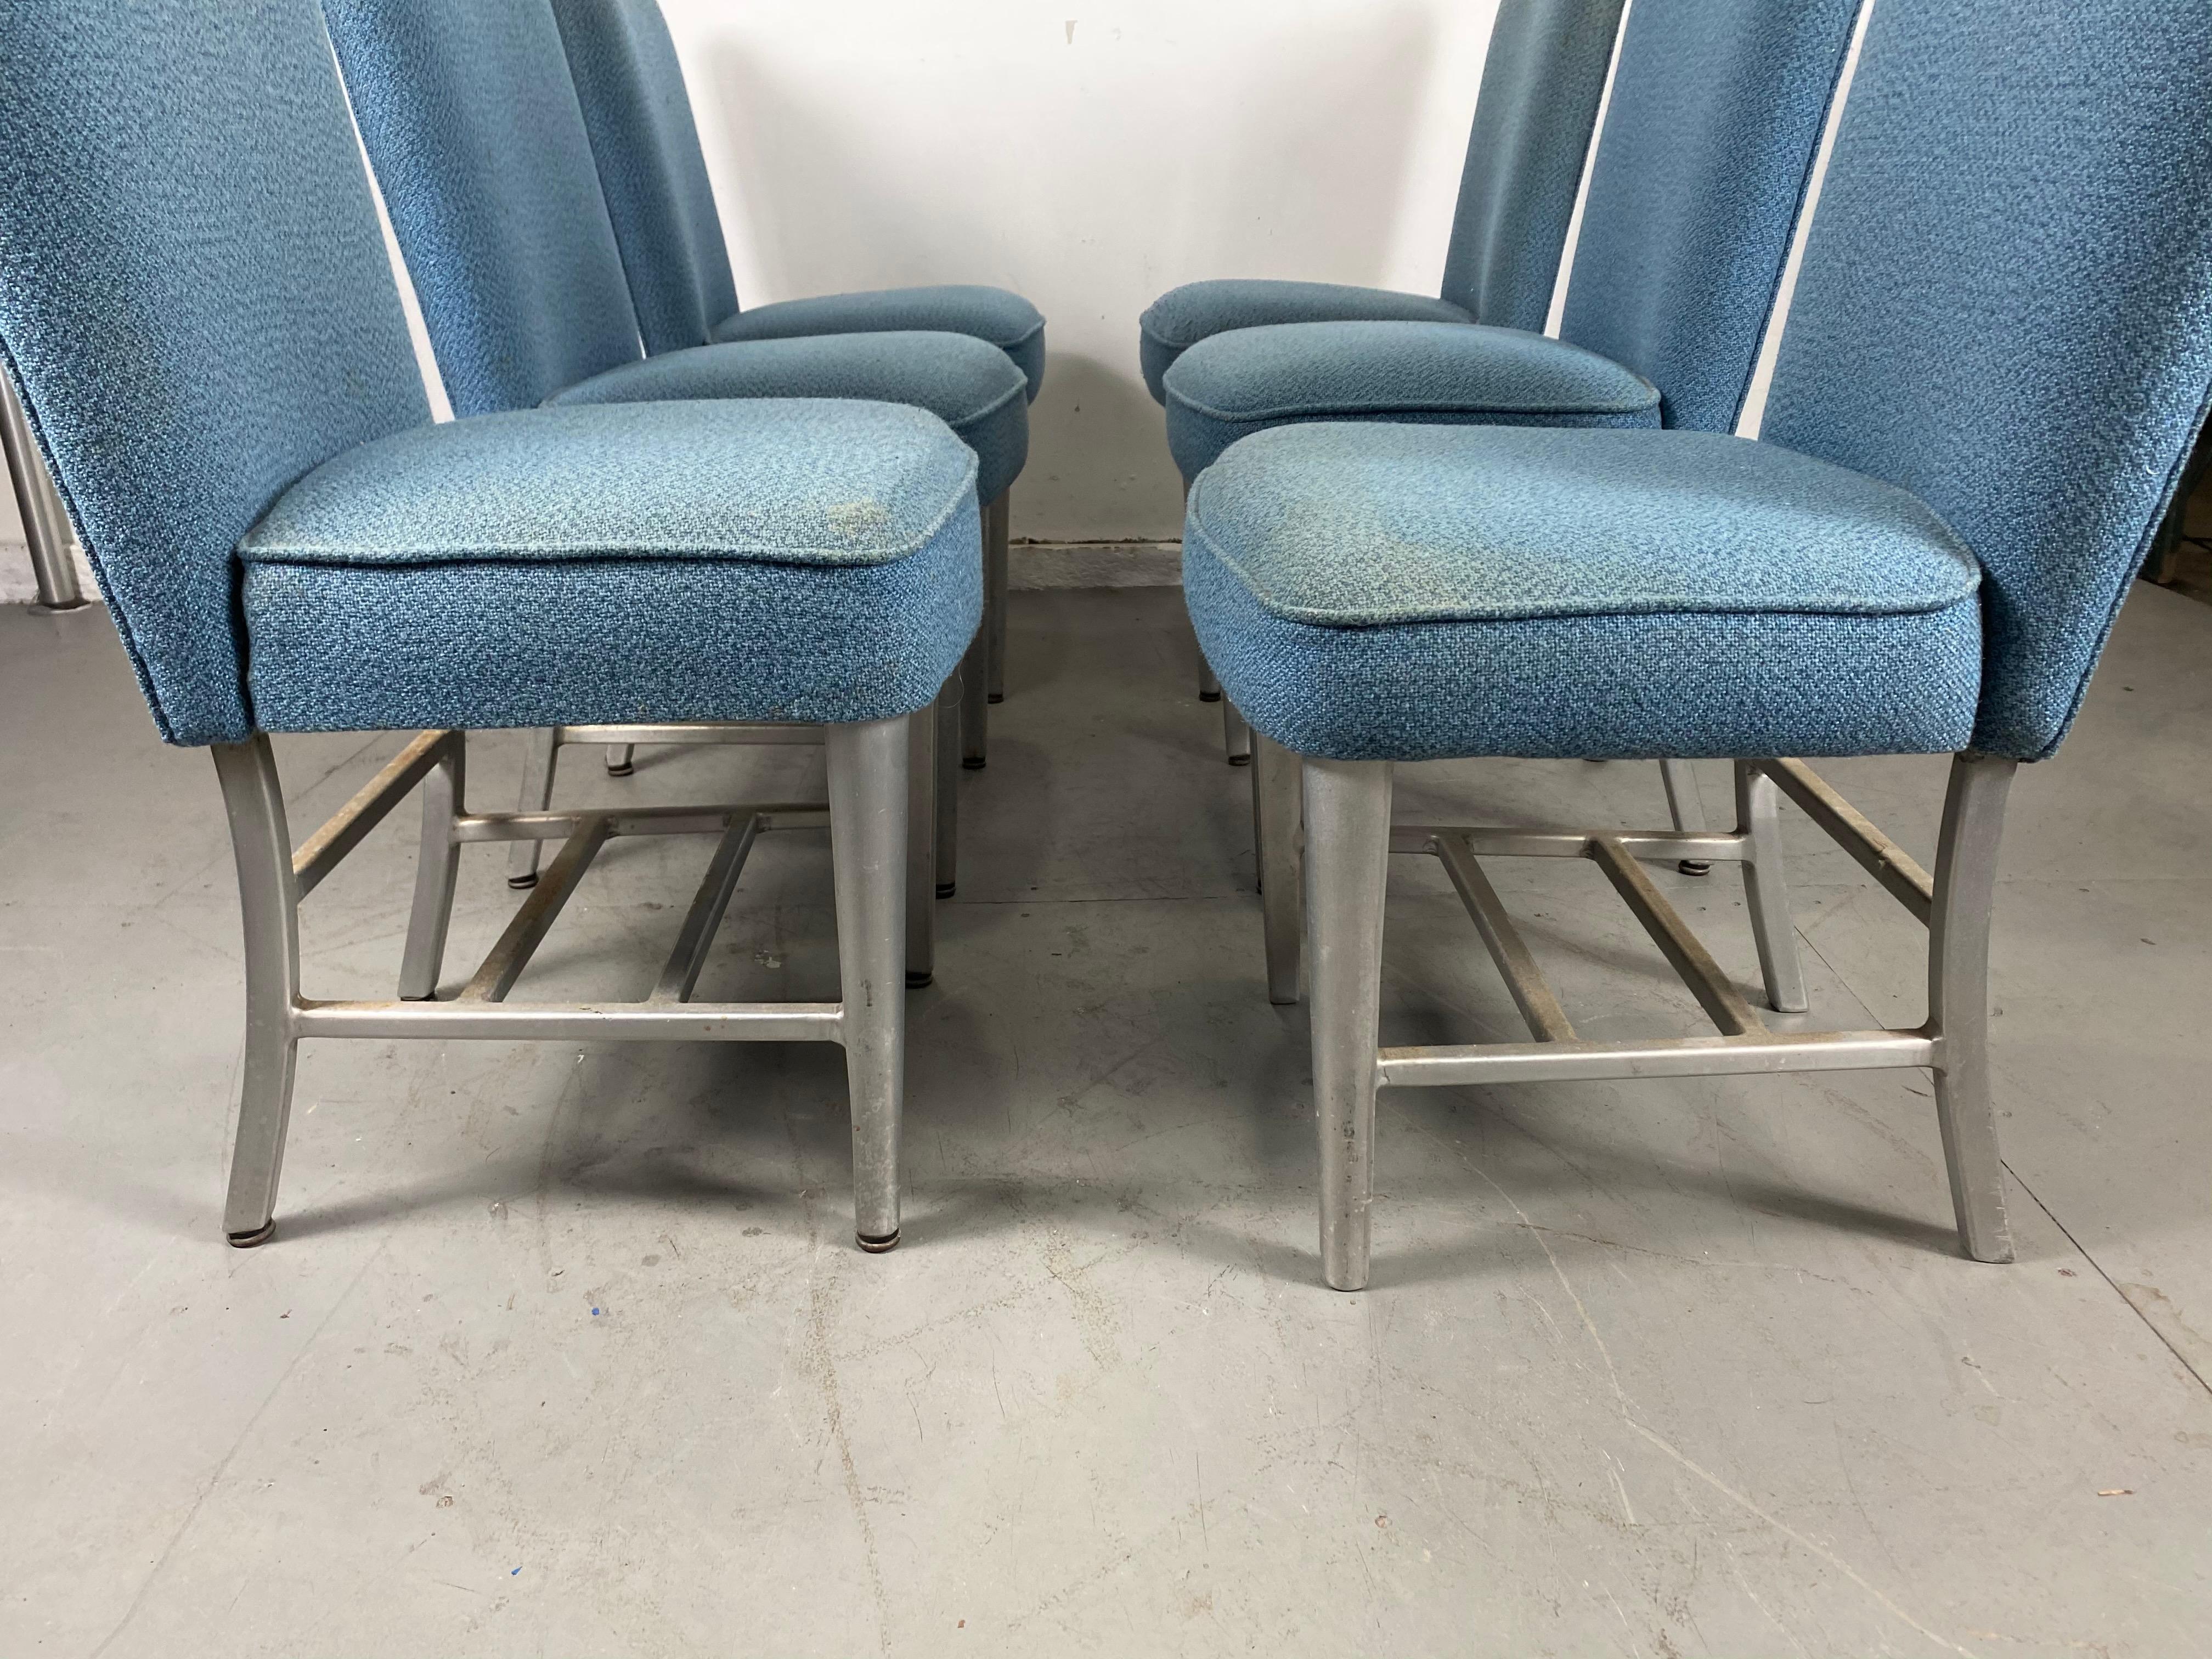 Art Deco Pullman Dining Car Chairs, Aluminum and Fabric, Attributed to Emeco For Sale 6